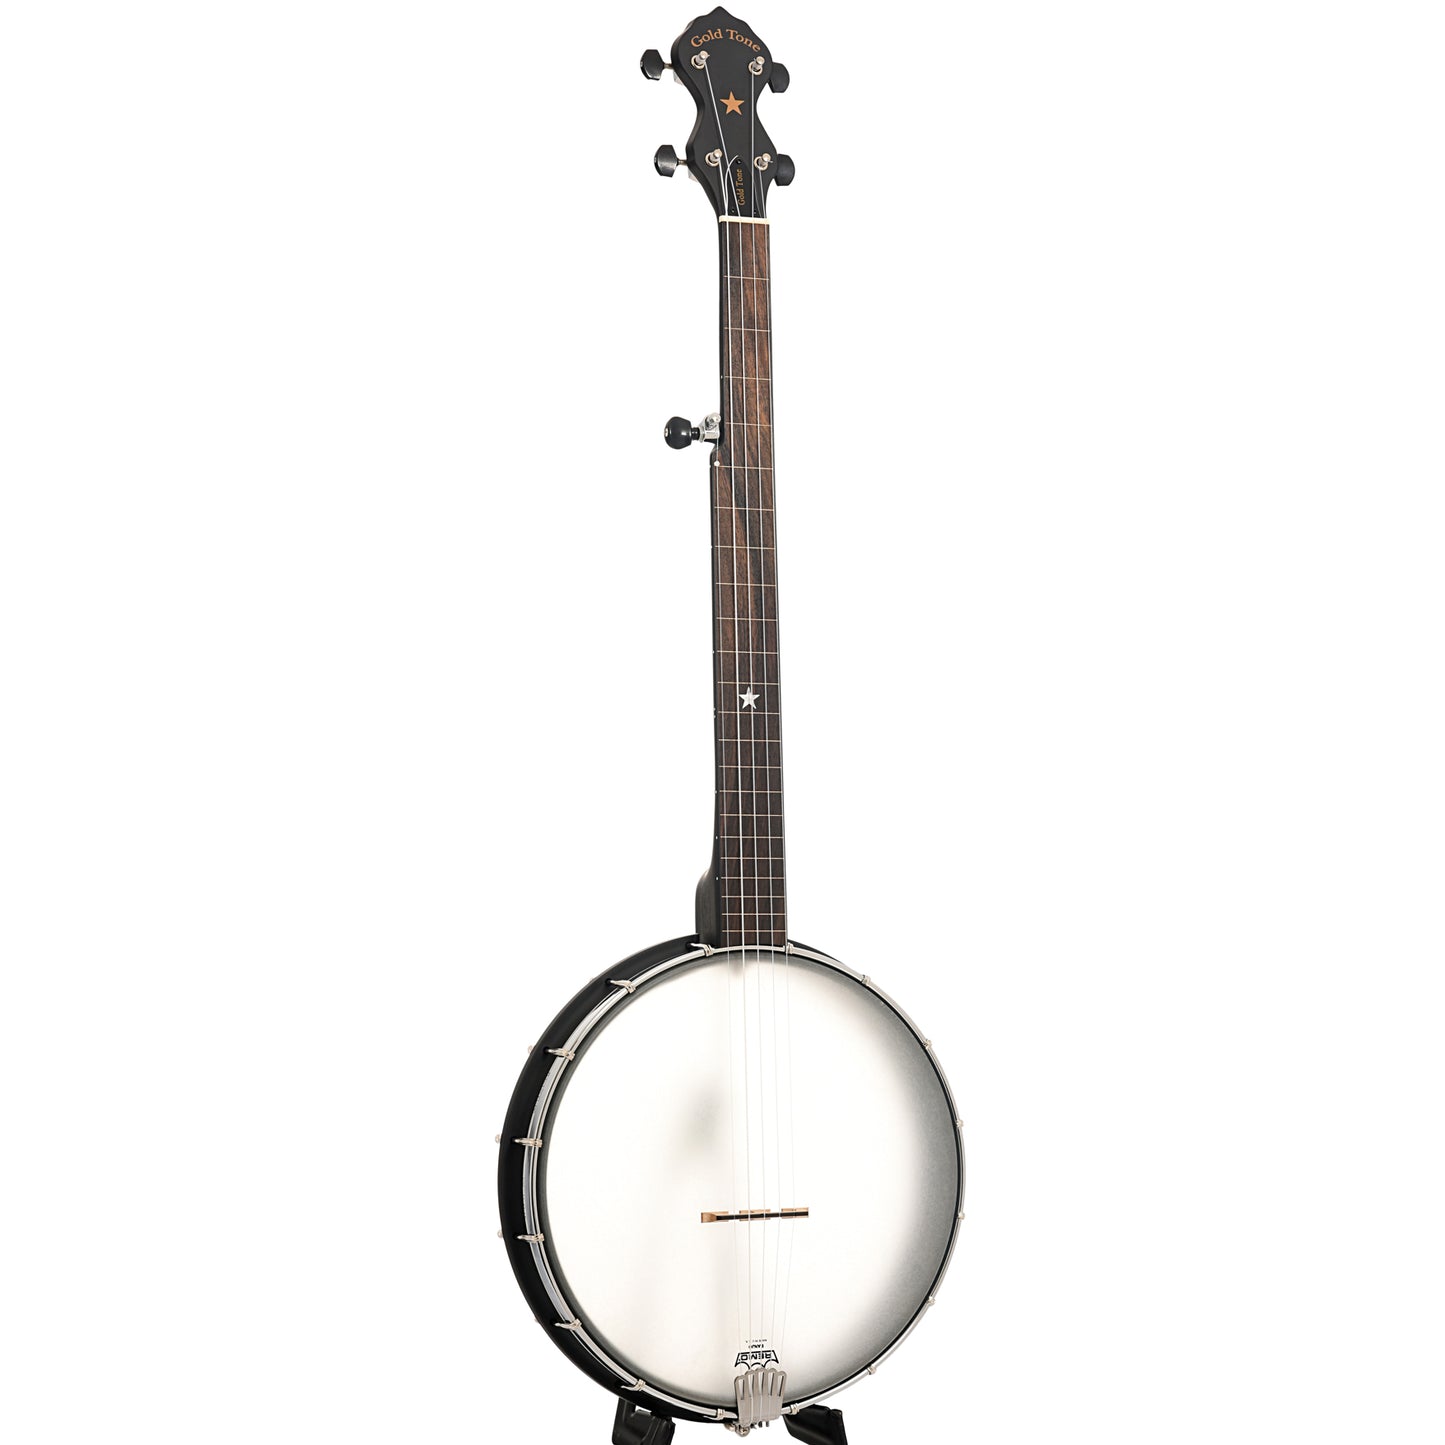 Full front and side of Gold Tone AC-12FL 12" Fretless Openback Banjo 